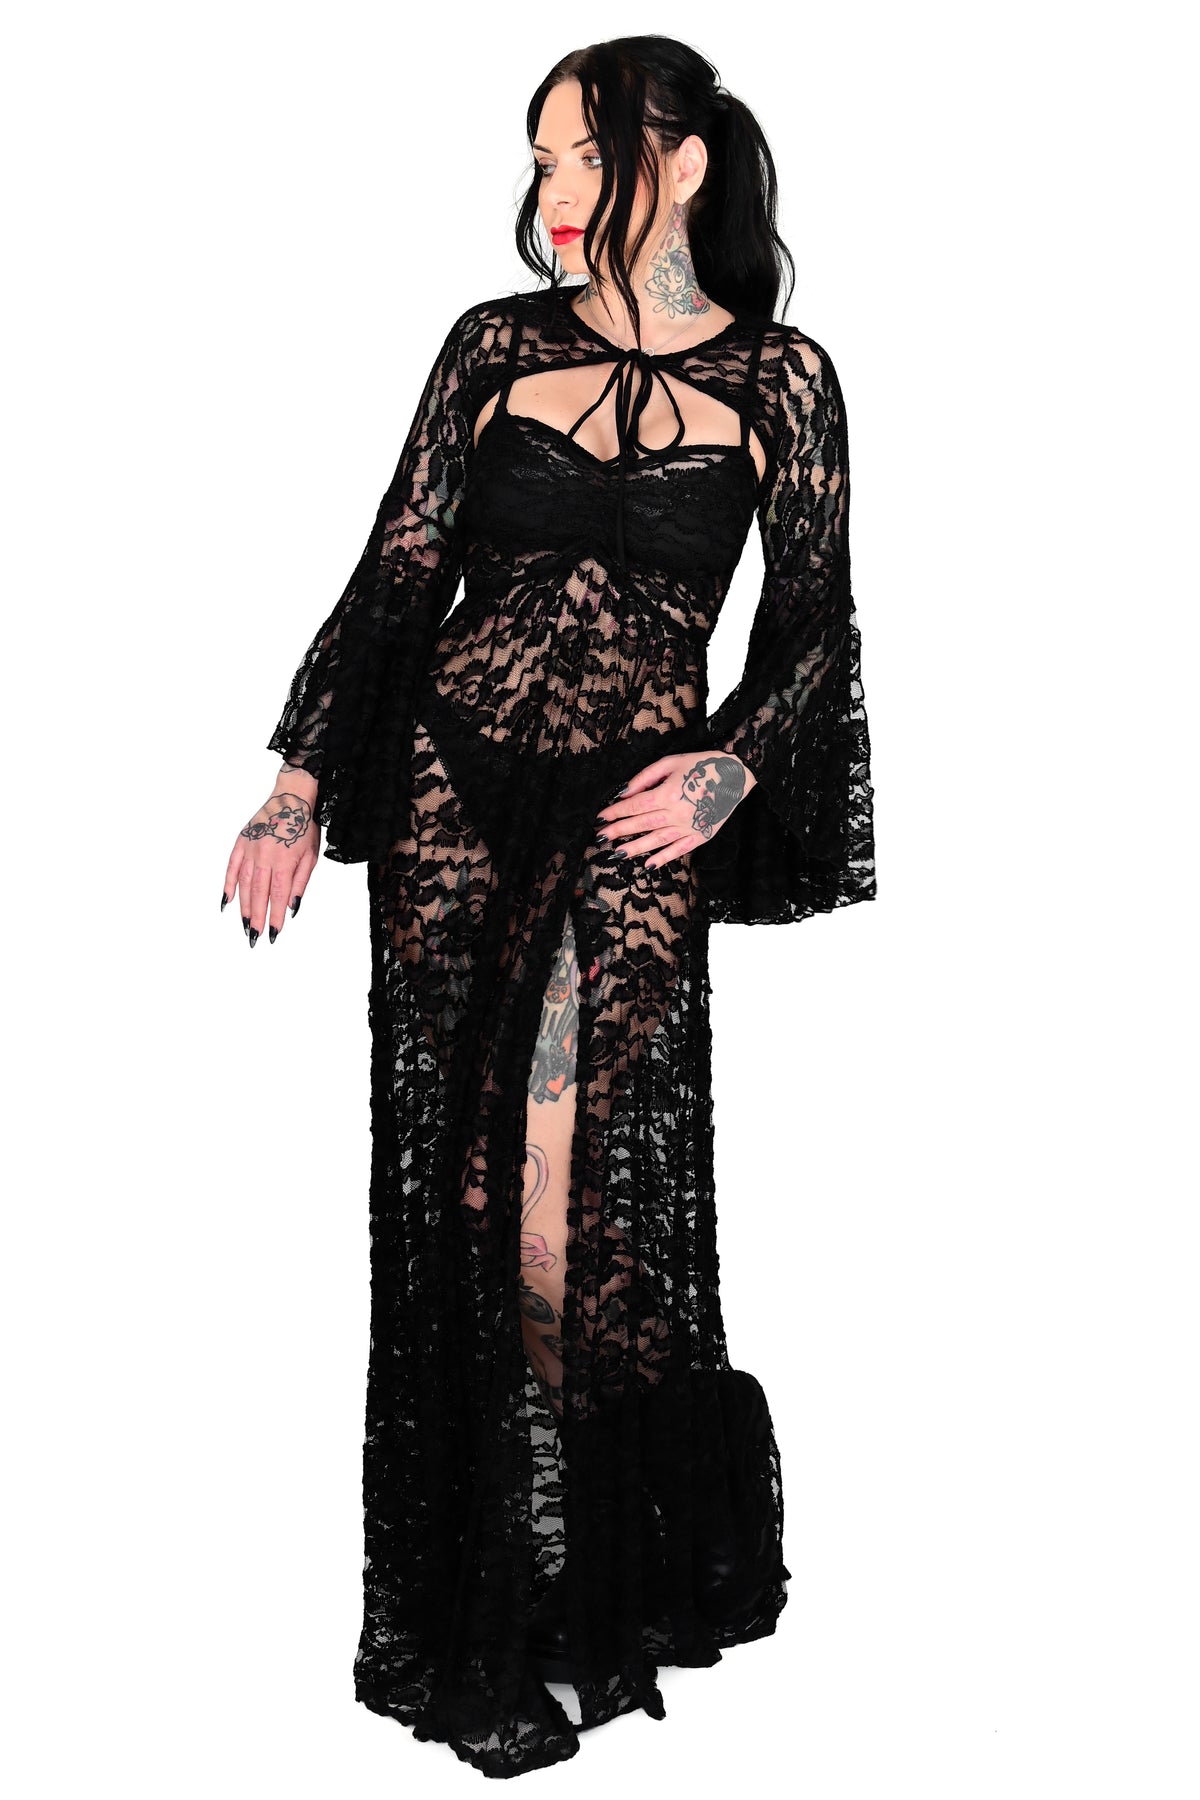 sheer lace maxi dress with spaghetti straps and side slit